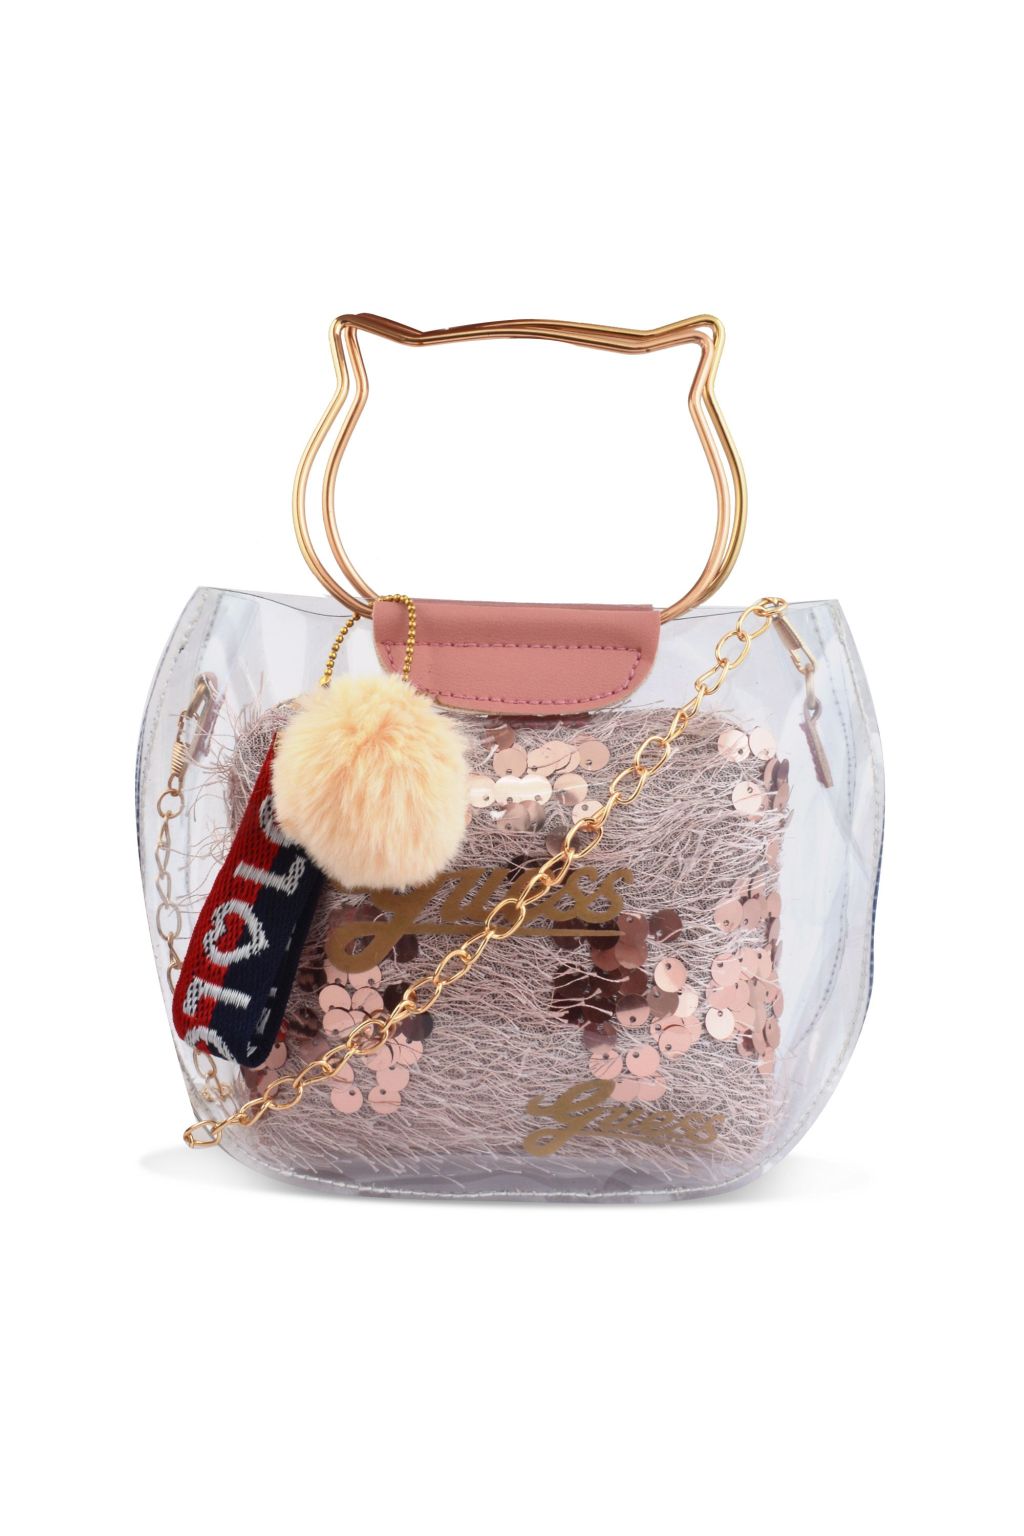 Clear Sling Bag Pvc Crossbody Shoulder Bags Transparent Casual Chest Phone  Pouch For Women Men Perfect For Hiking Stadium Work Or Concert  Fruugo IN